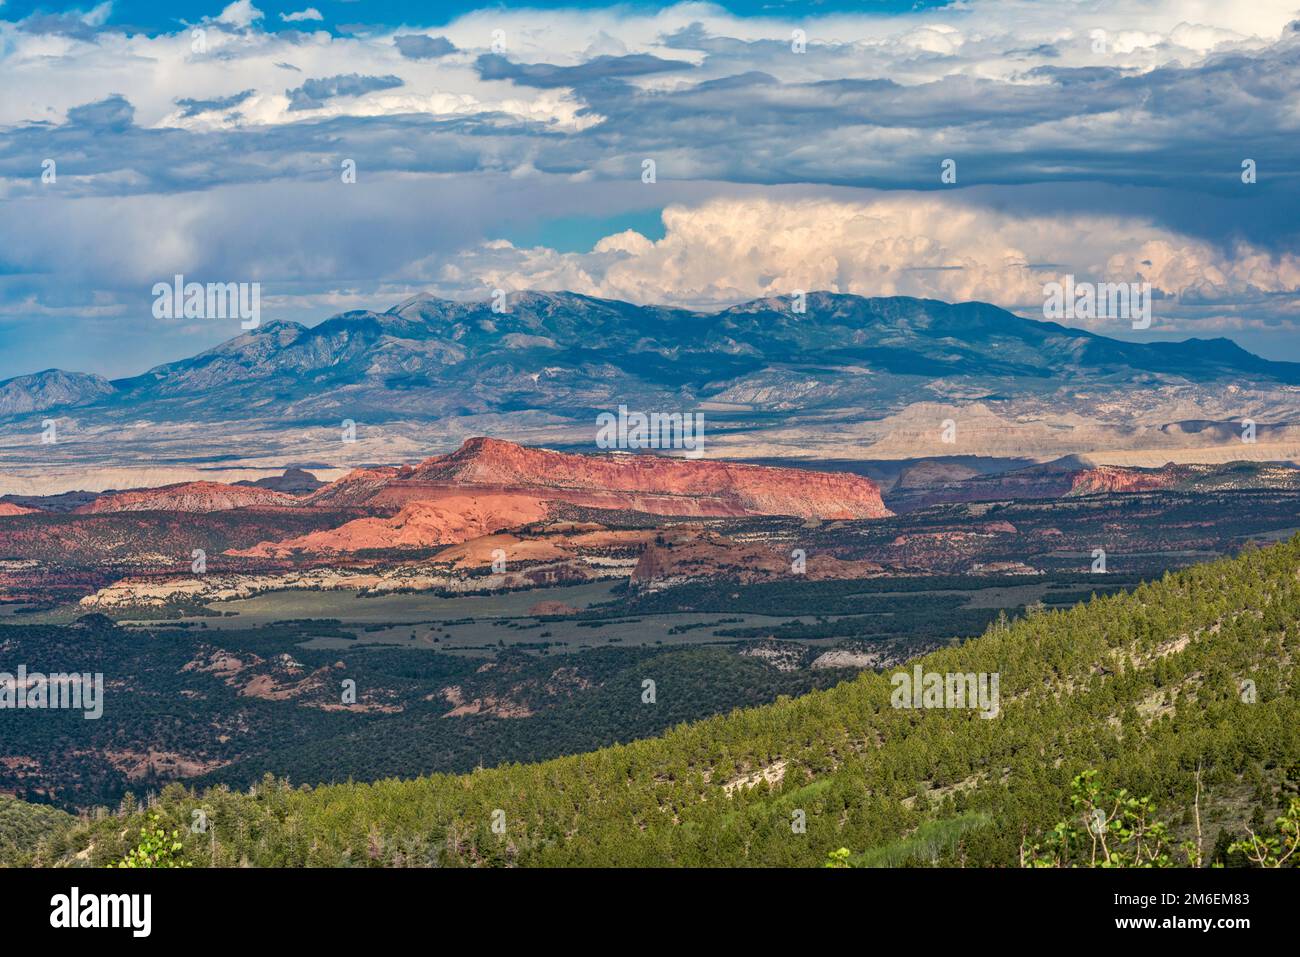 Vista in lontananza di WaterPocket Fold, Capitol Reef, Henry Mountains, tramonto, vicino a Larb Hollow Overlook, Journey Through Time Scenic Byway, Utah, USA Foto Stock